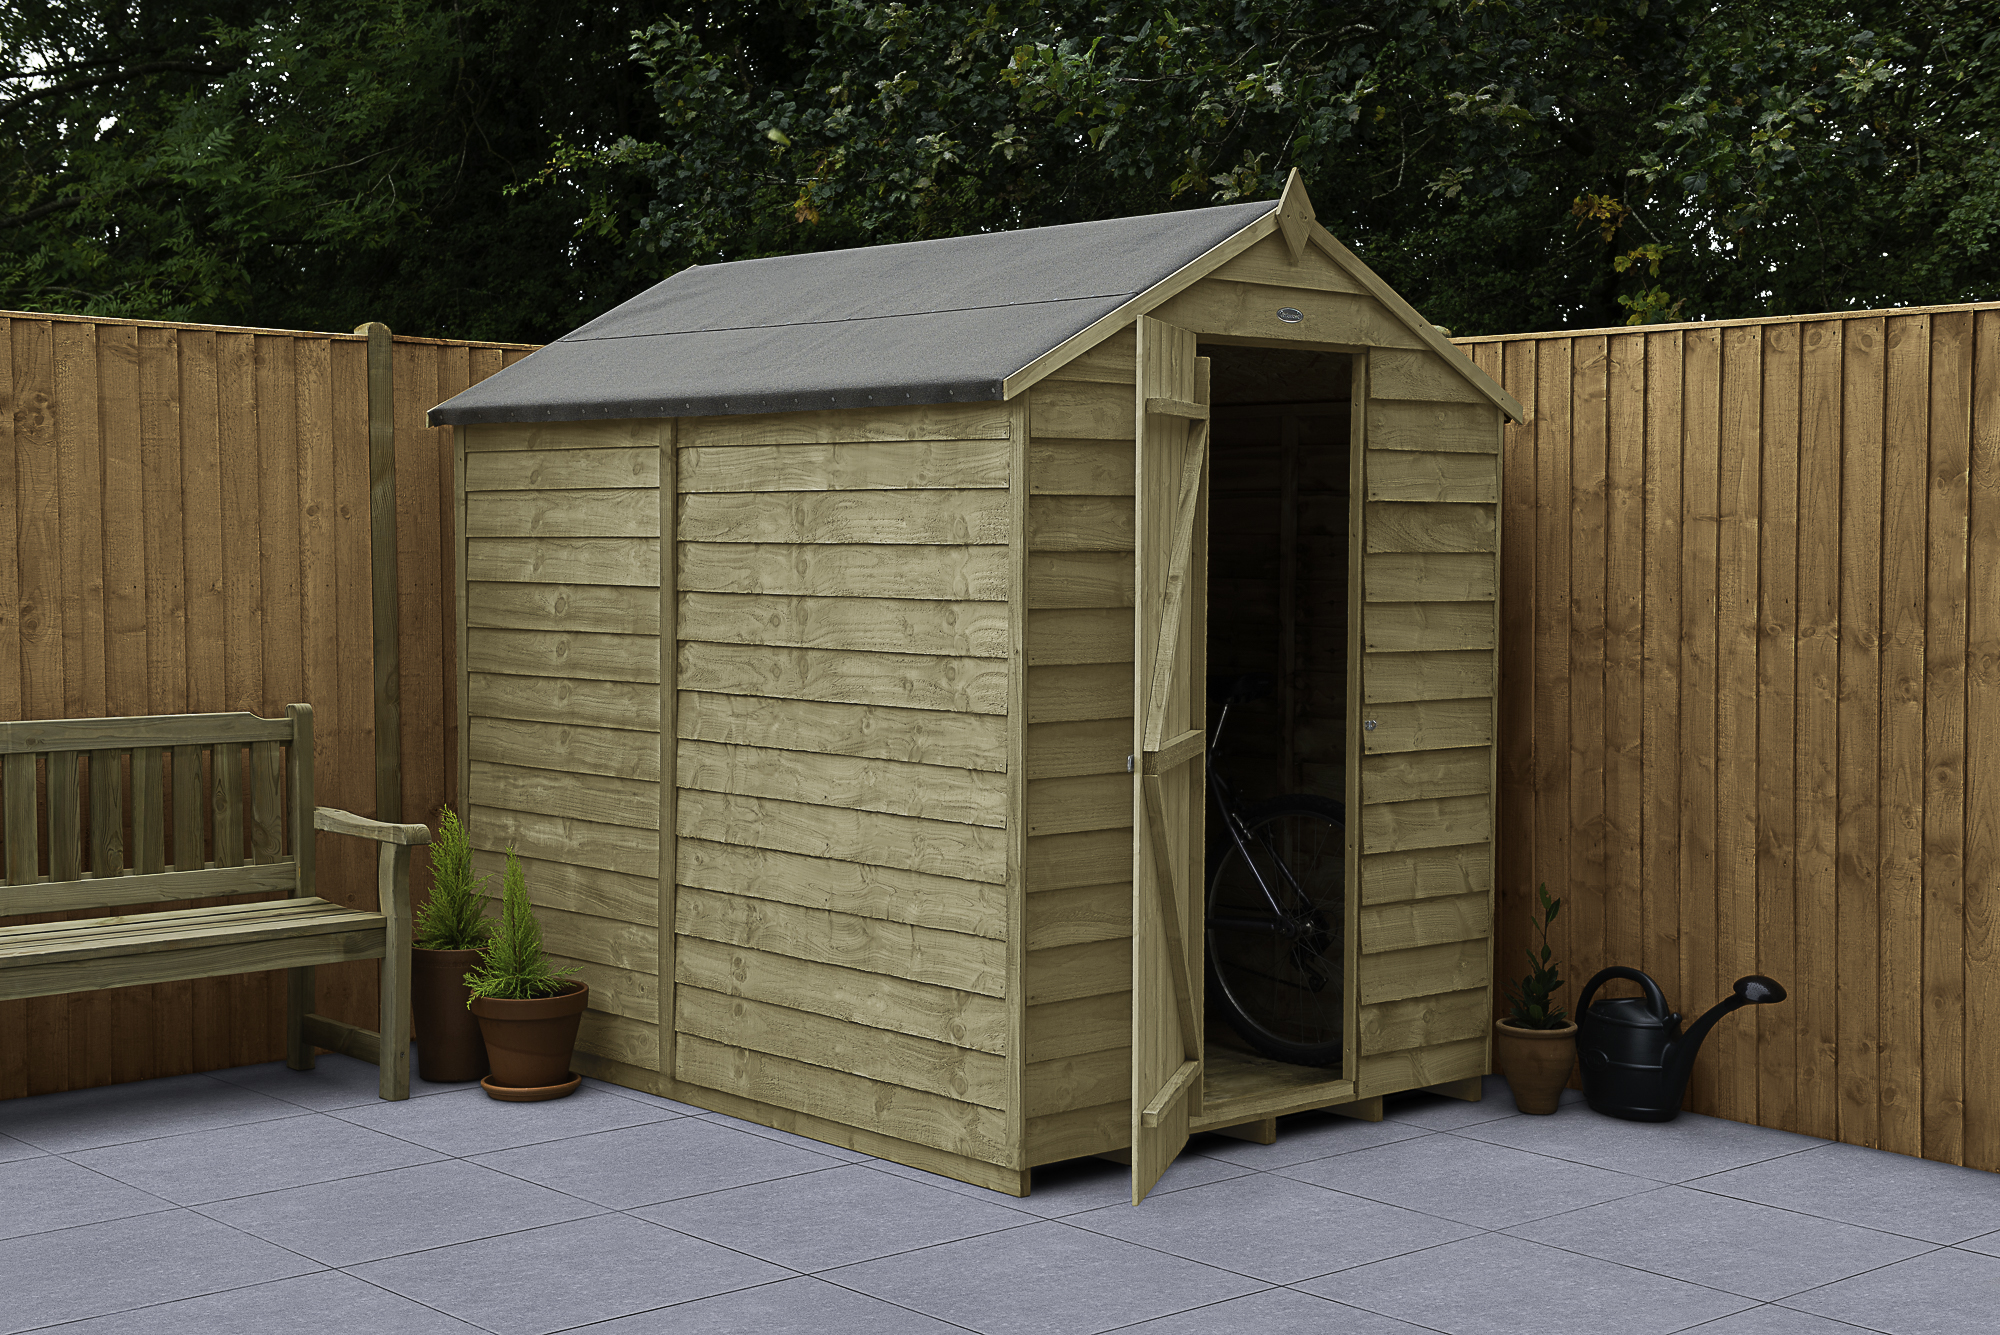 Image of Forest Garden 7 x 5ft Apex Overlap Pressure Treated Windowless Shed with Assembly